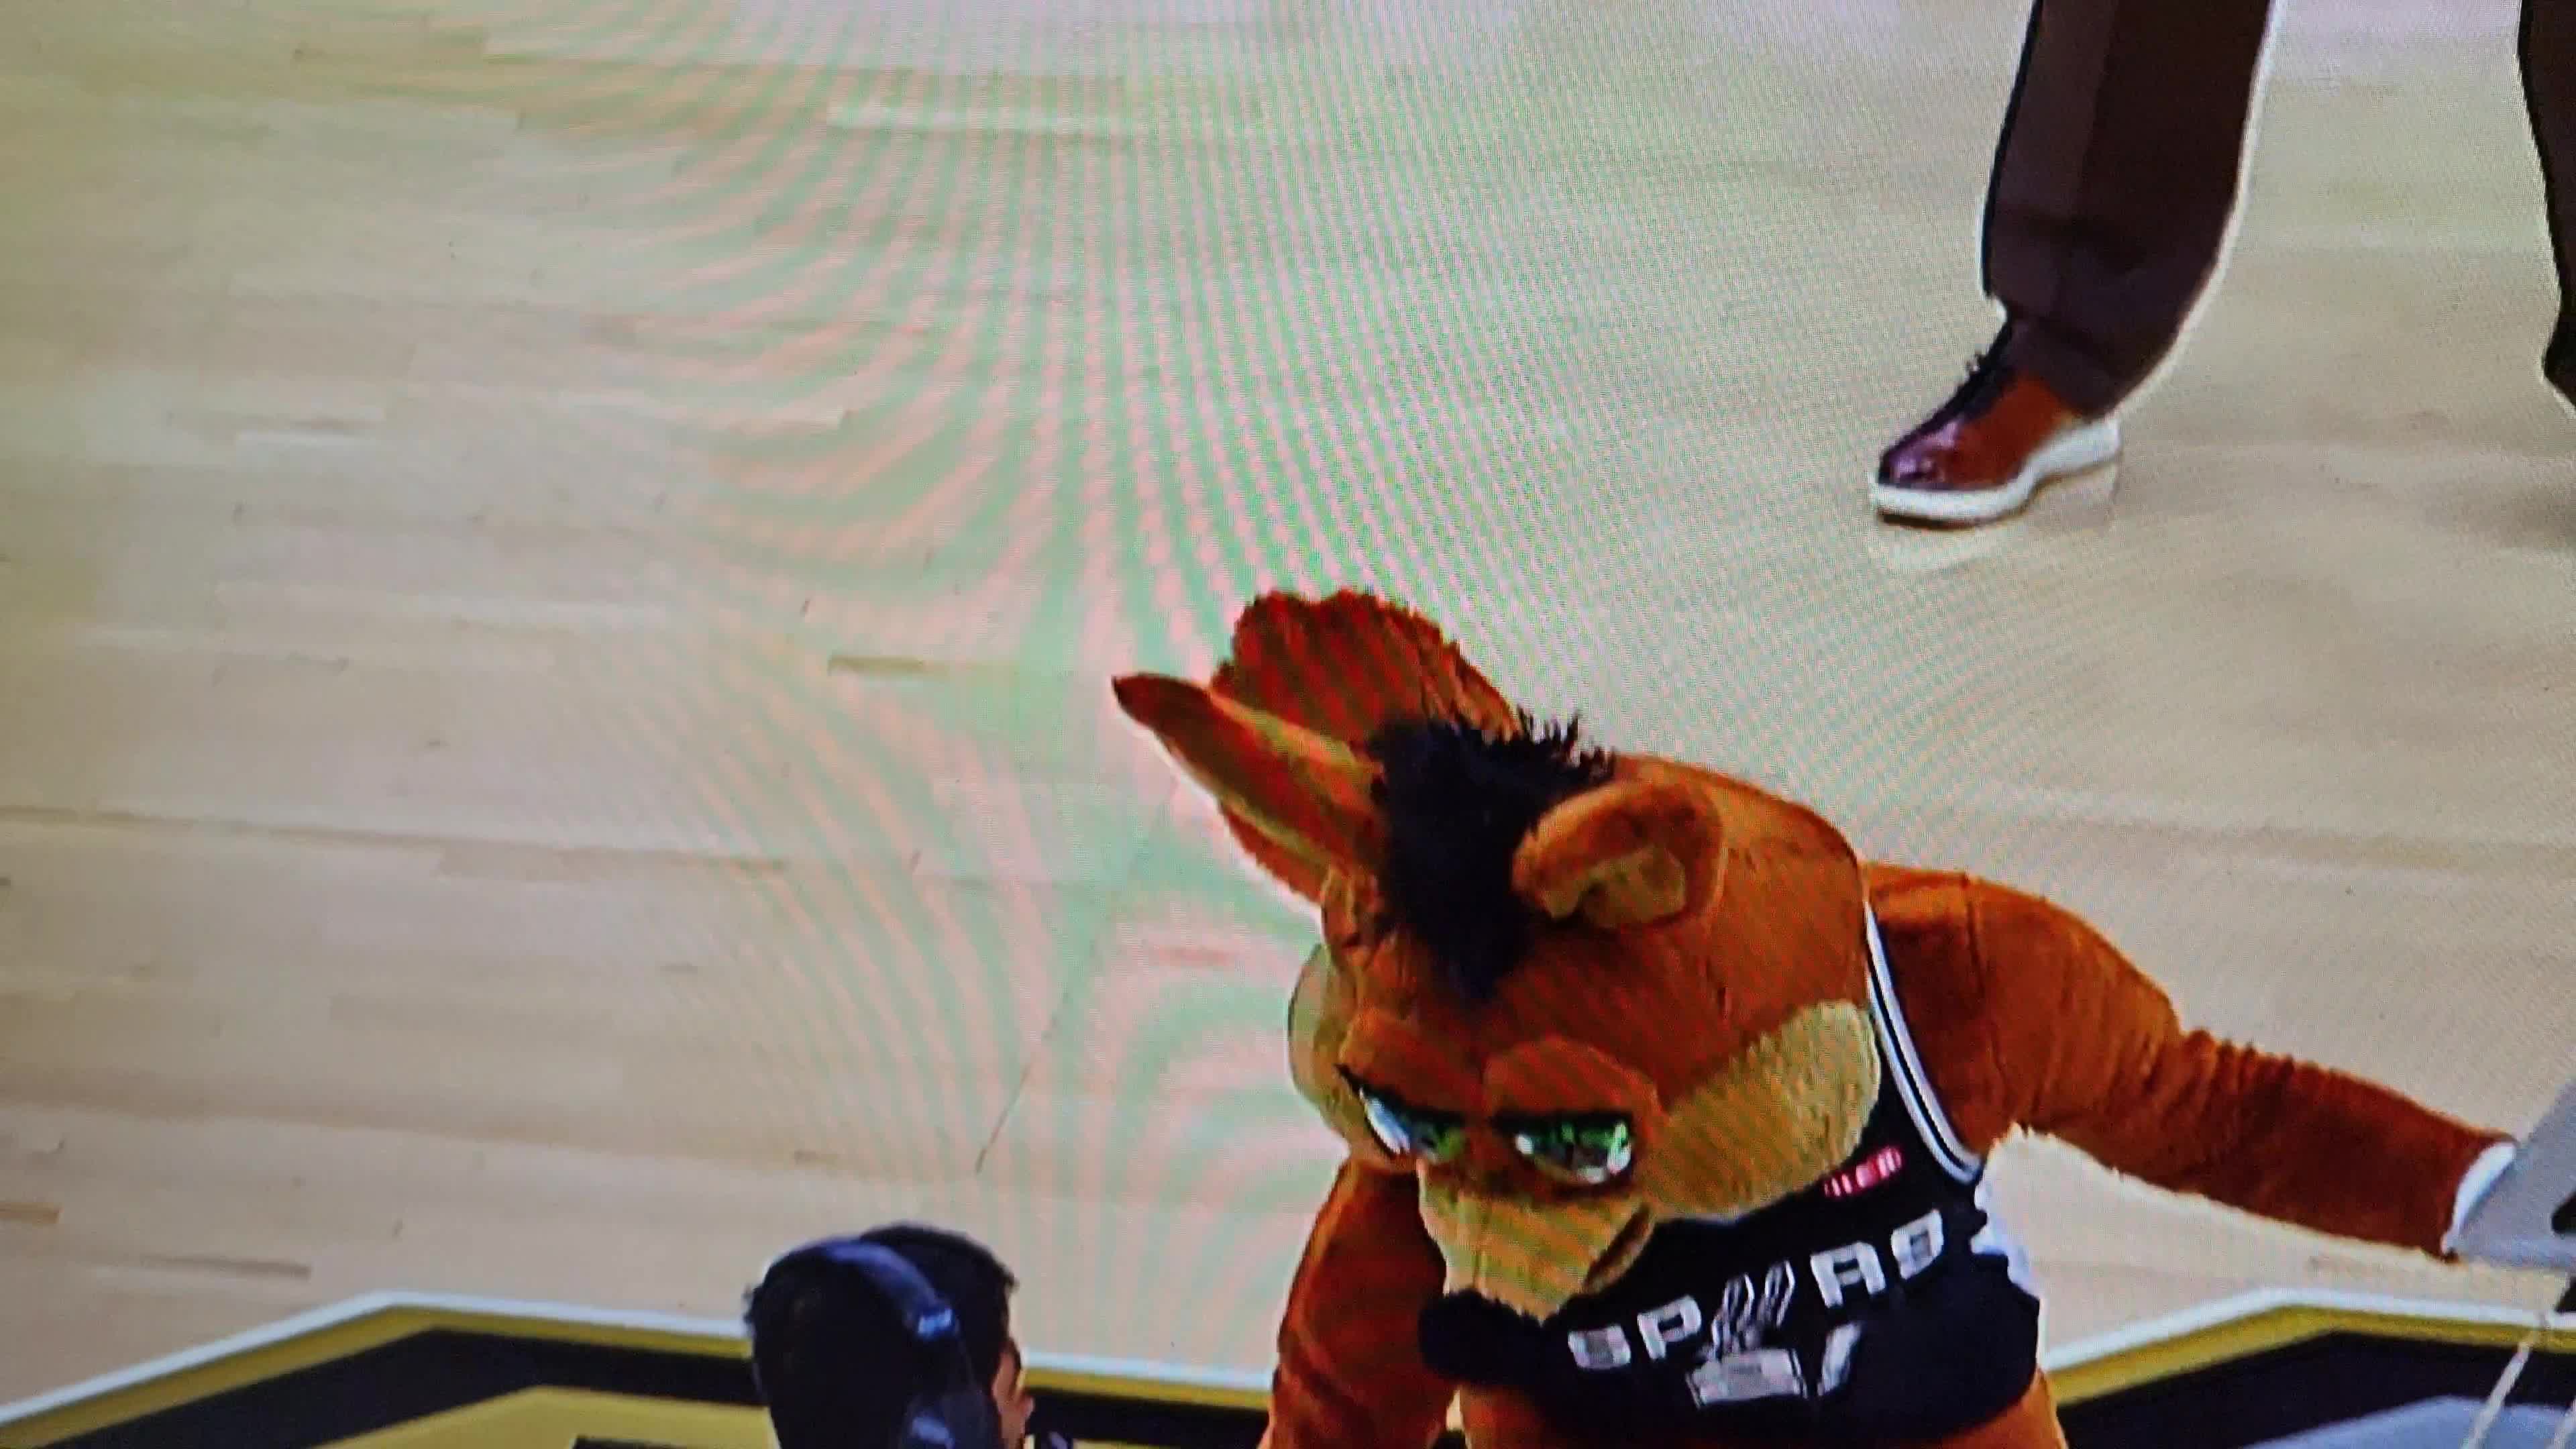 The Spurs Coyote Wins NBA Mascot of the Year